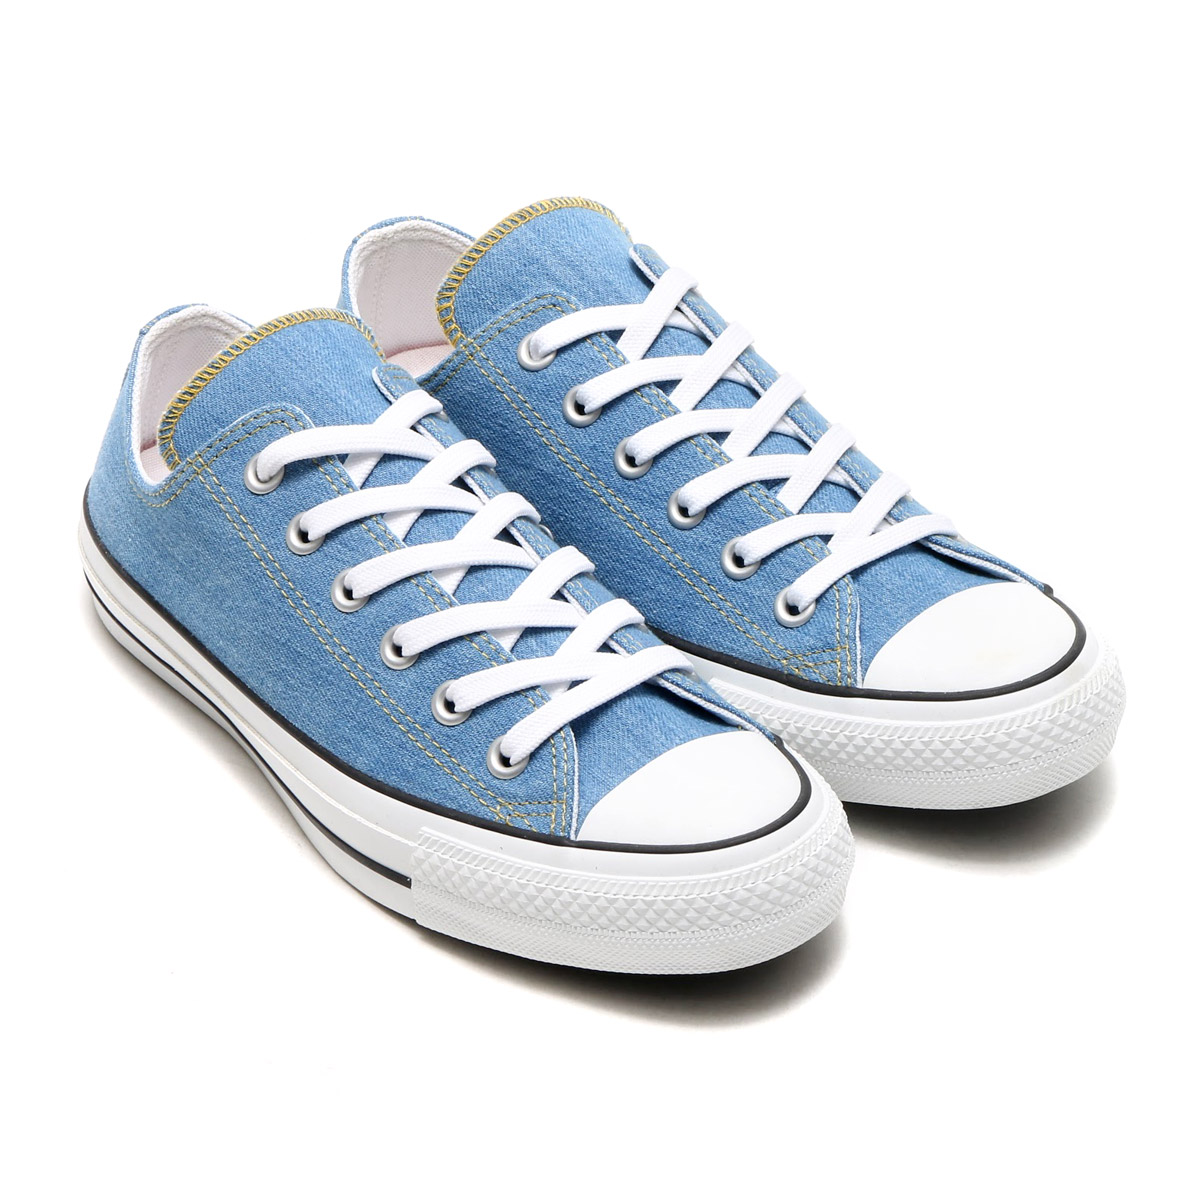 cheap converse sneakers online